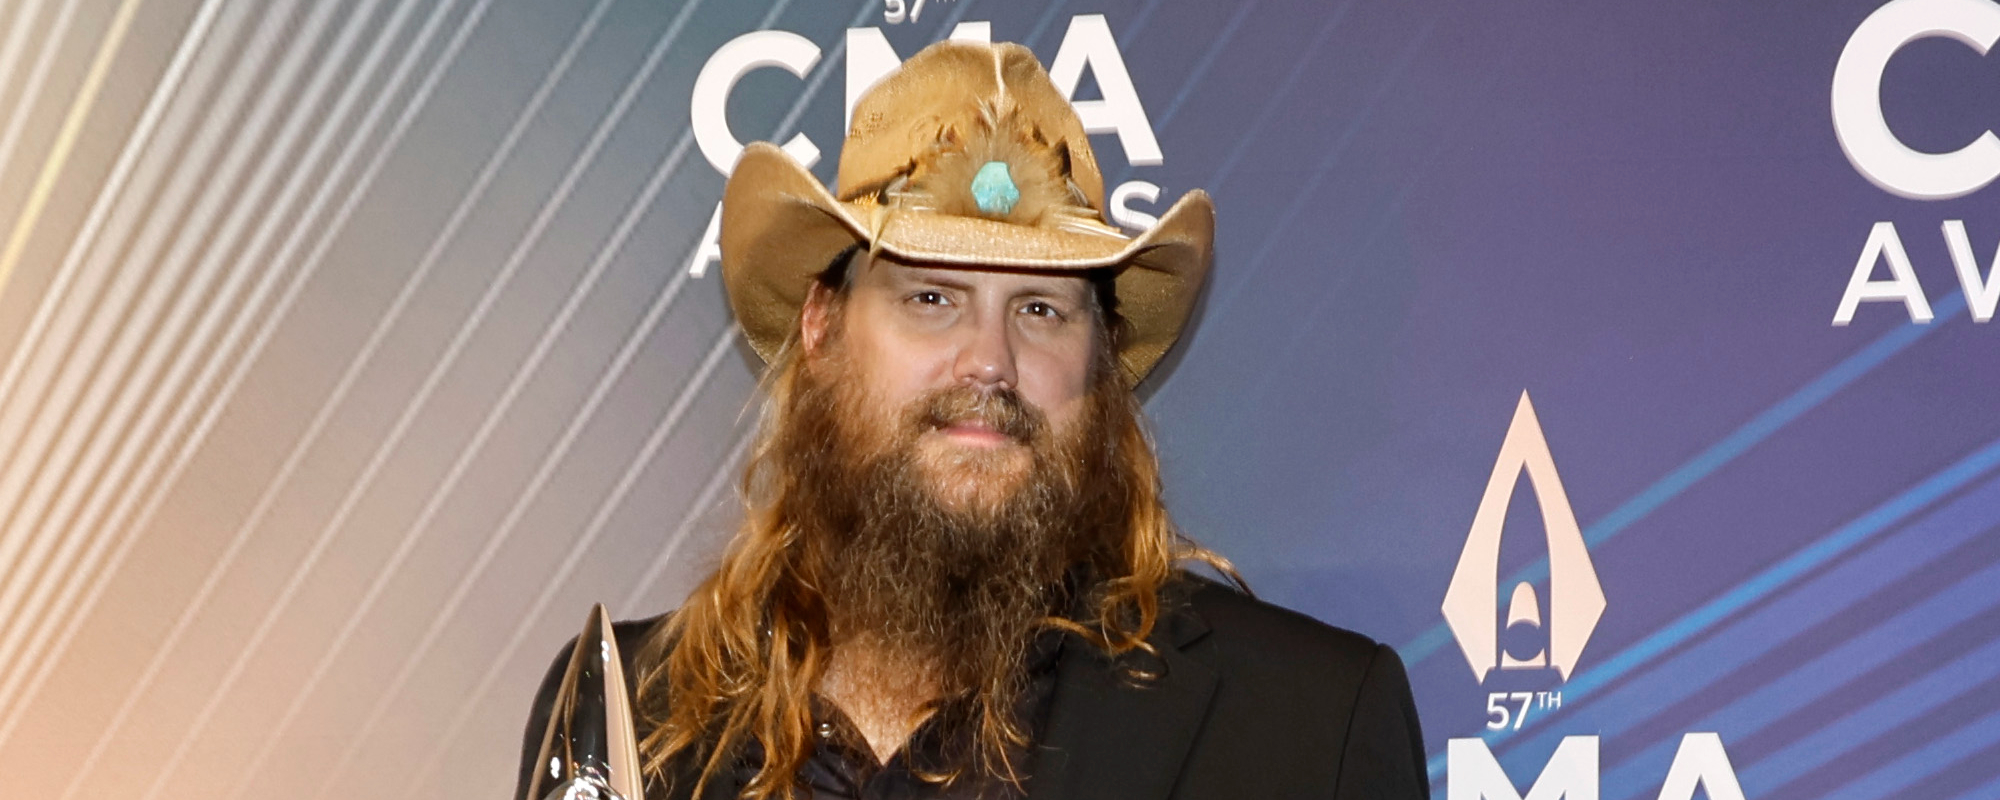 An Inspired Chris Stapleton Says “Just Get Me Nearly Naked on a Bearskin Rug” After Witnessing Beyoncé Concert